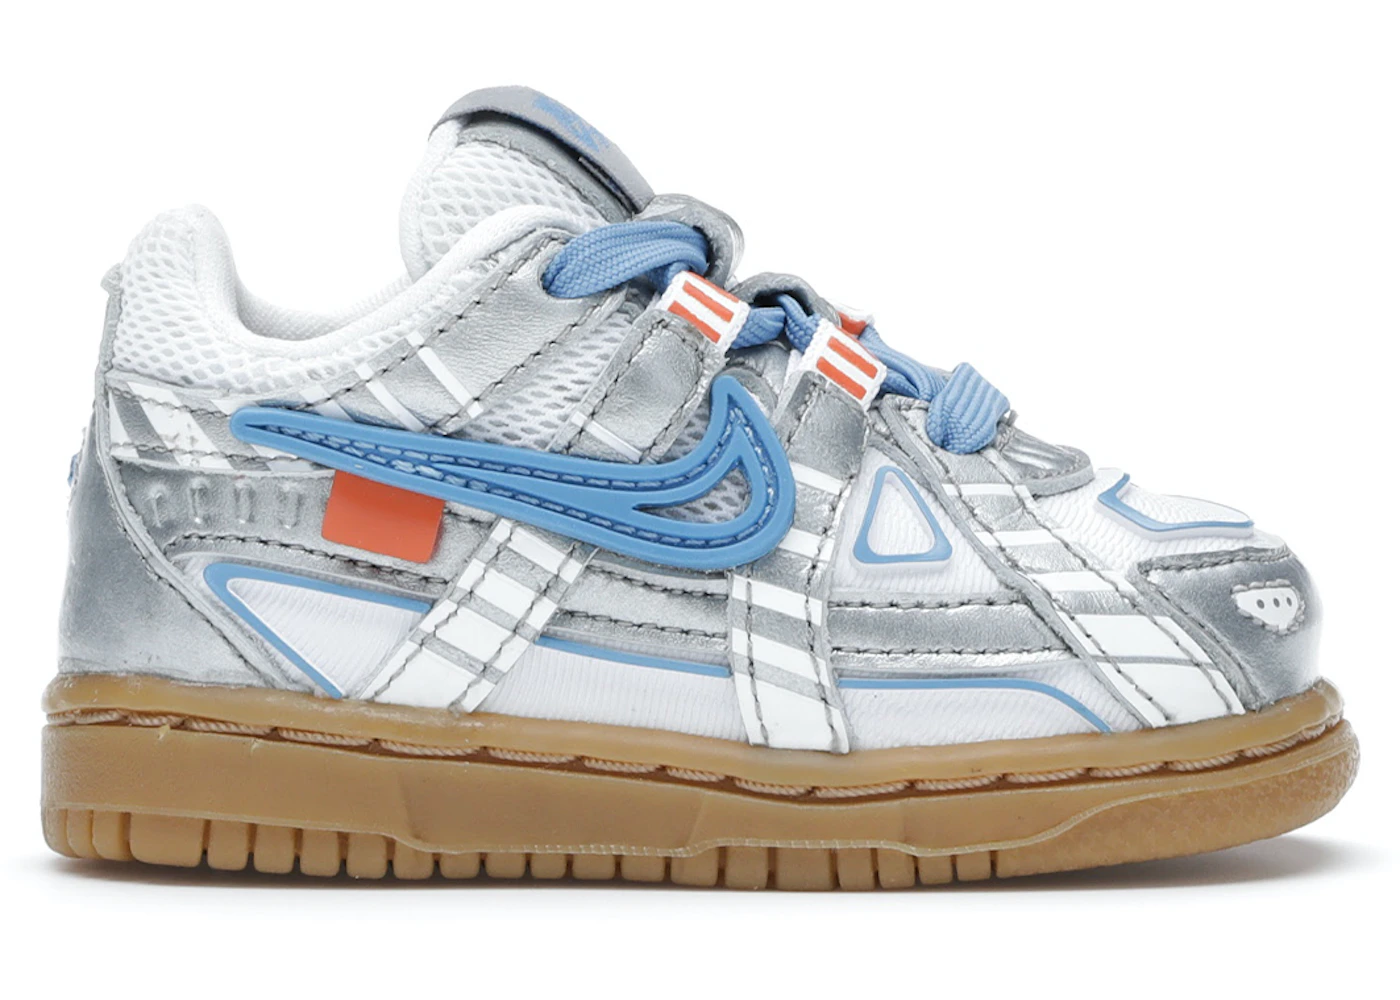 Nike Air Rubber Dunk Off-White University Blue (TD) Toddler - CW7444 ...